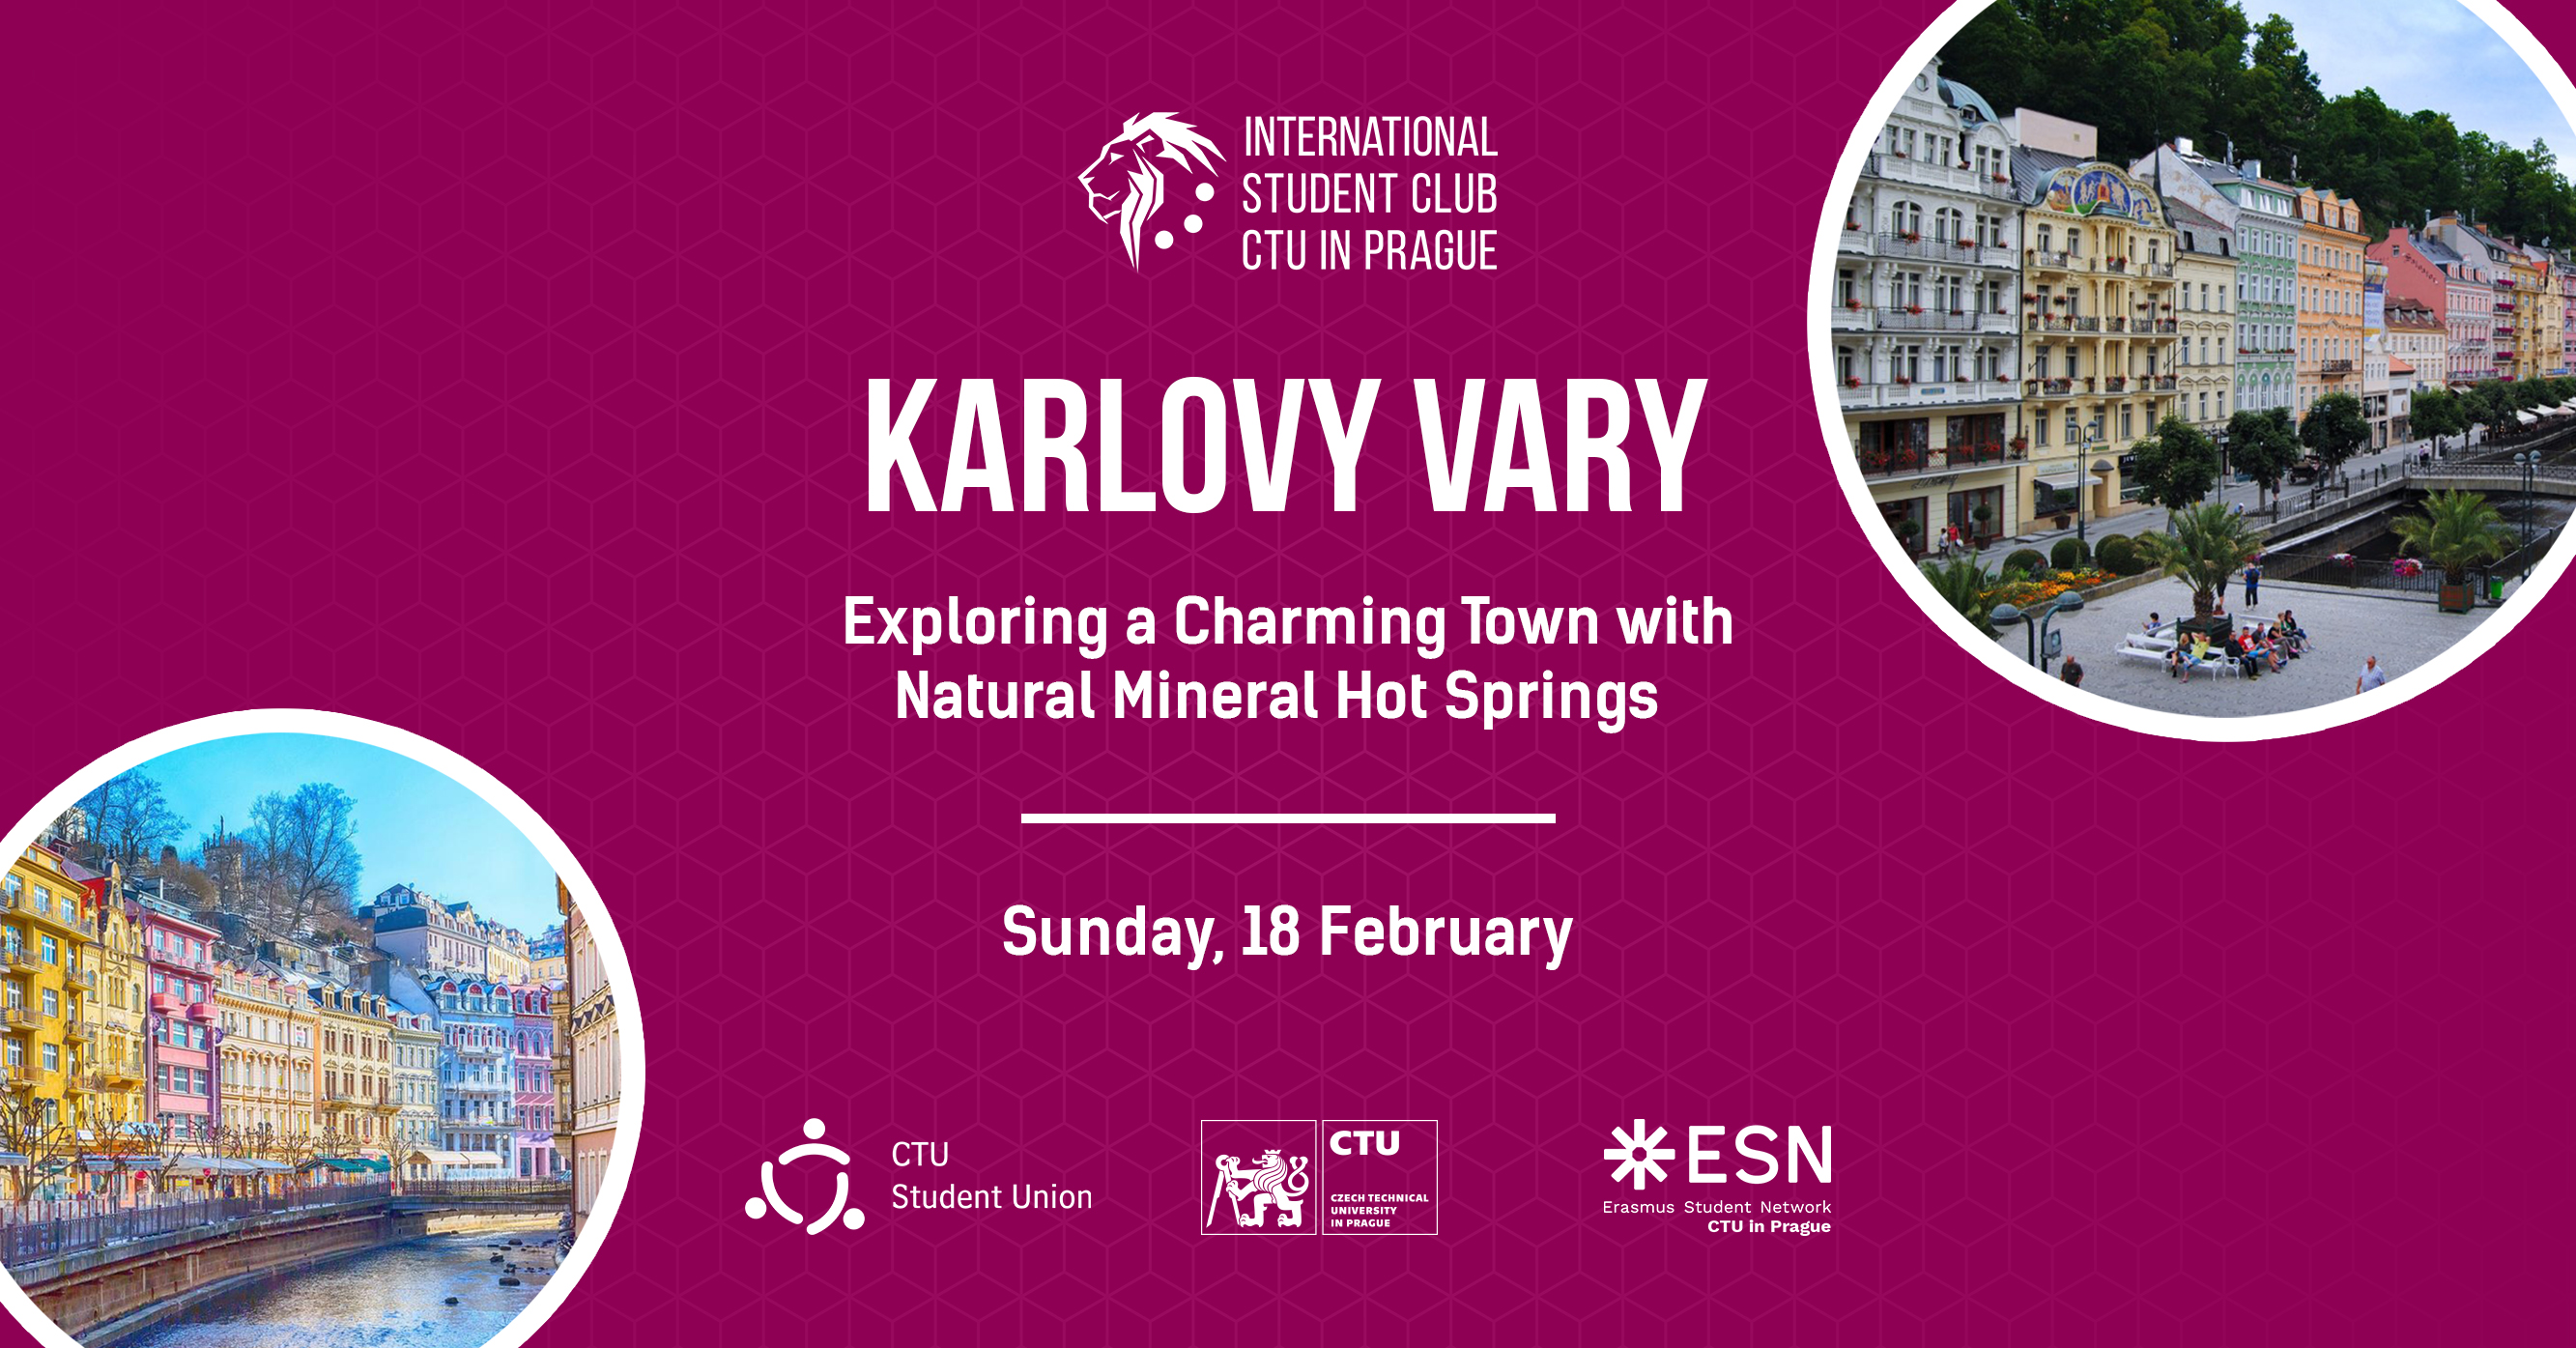 Trip to Karlovy Vary: Exploring a Charming Town with Natural Mineral Hot Springs